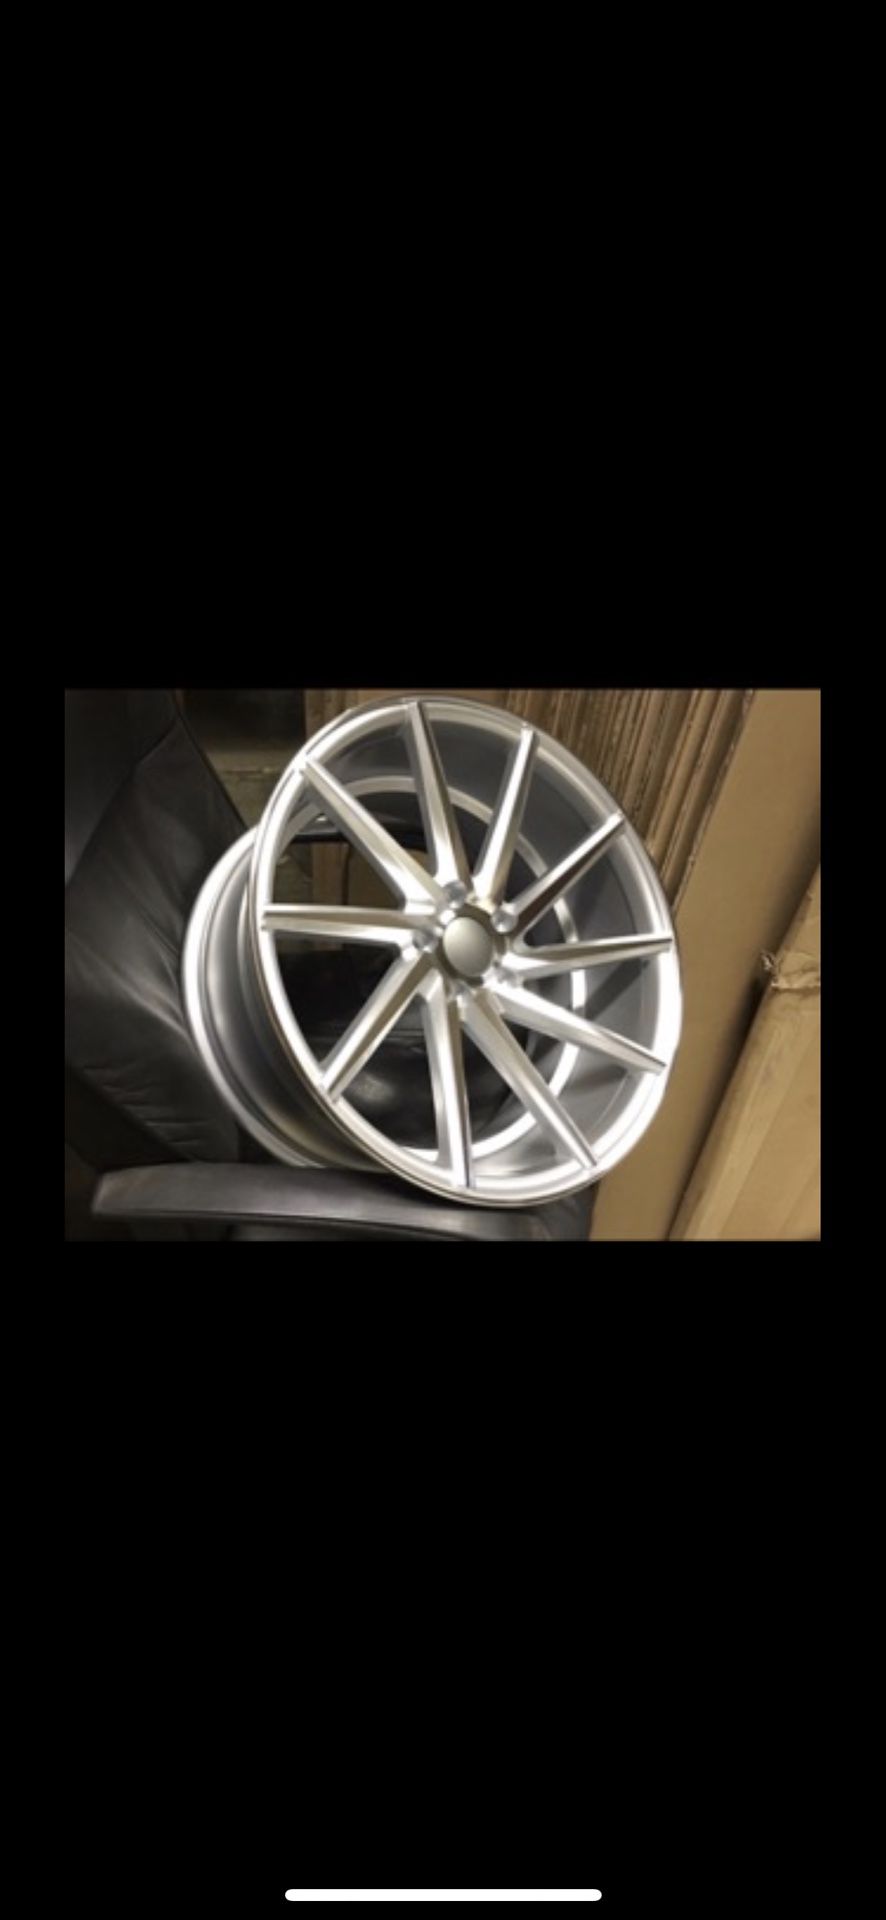 19 inch Wheels 5x112 5x114 5x120(only 50 down payment / no credit check)